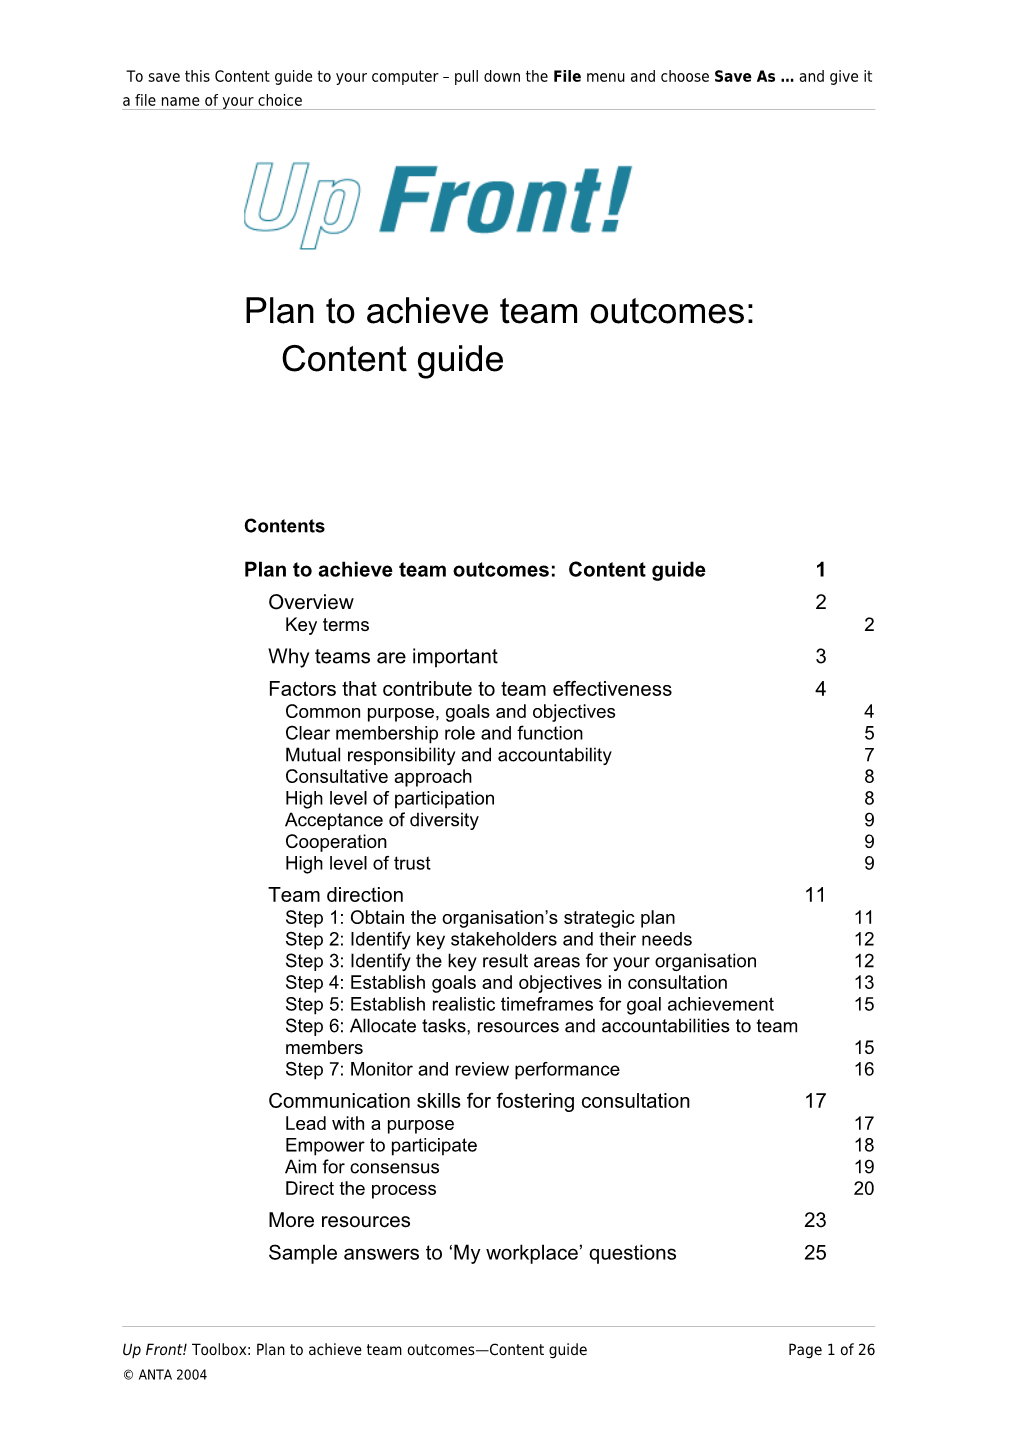 Plan to Achieve Team Outcomes Content Guide